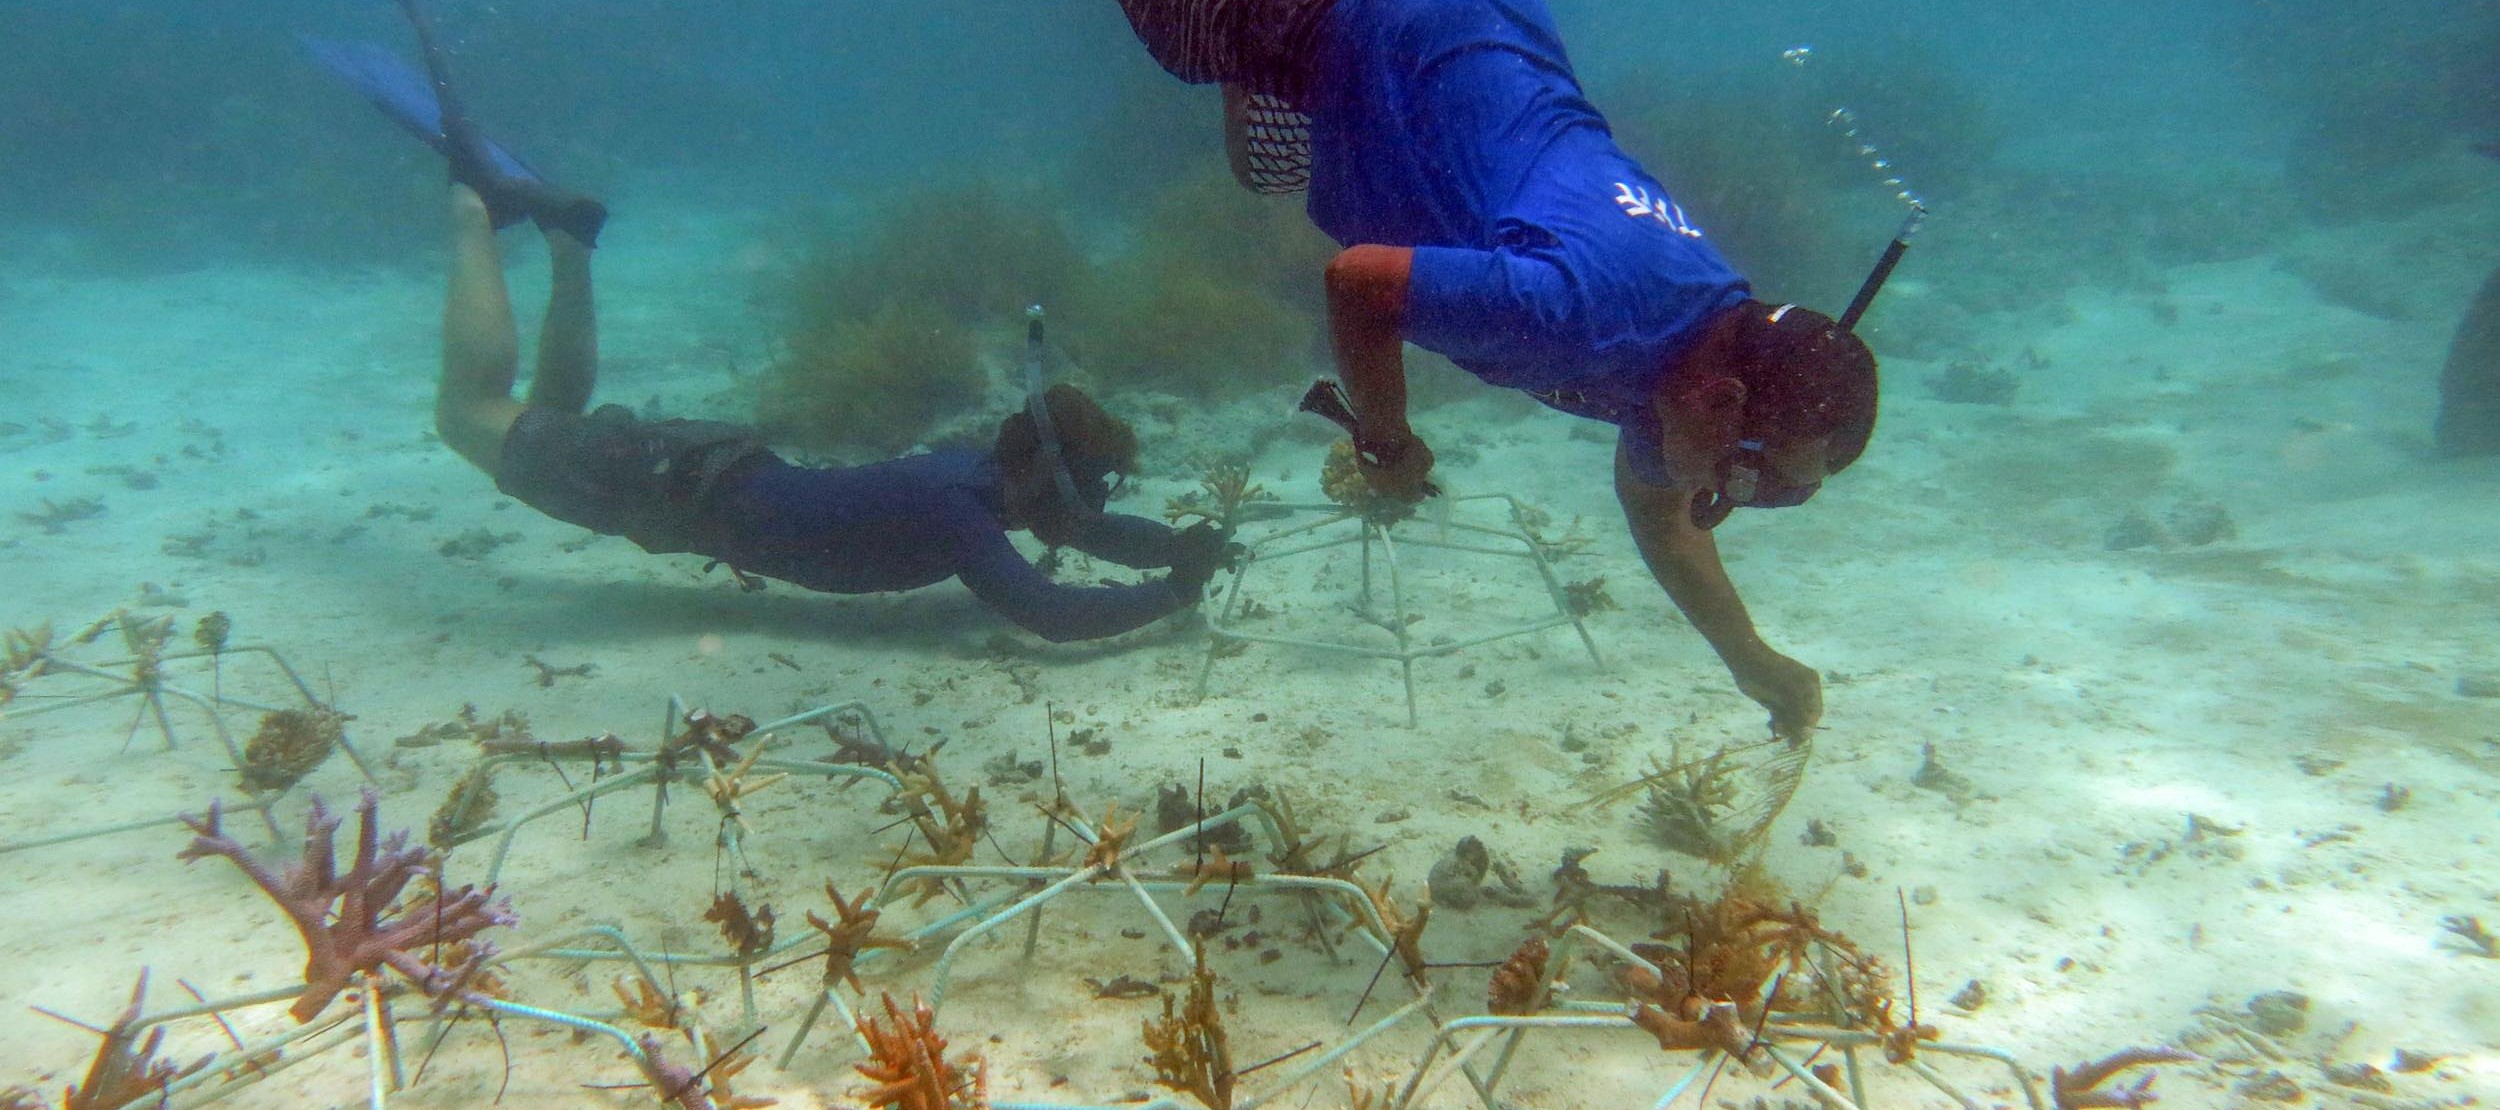 PICRC’s coral restoration project and collaboration in Ngaraard continues